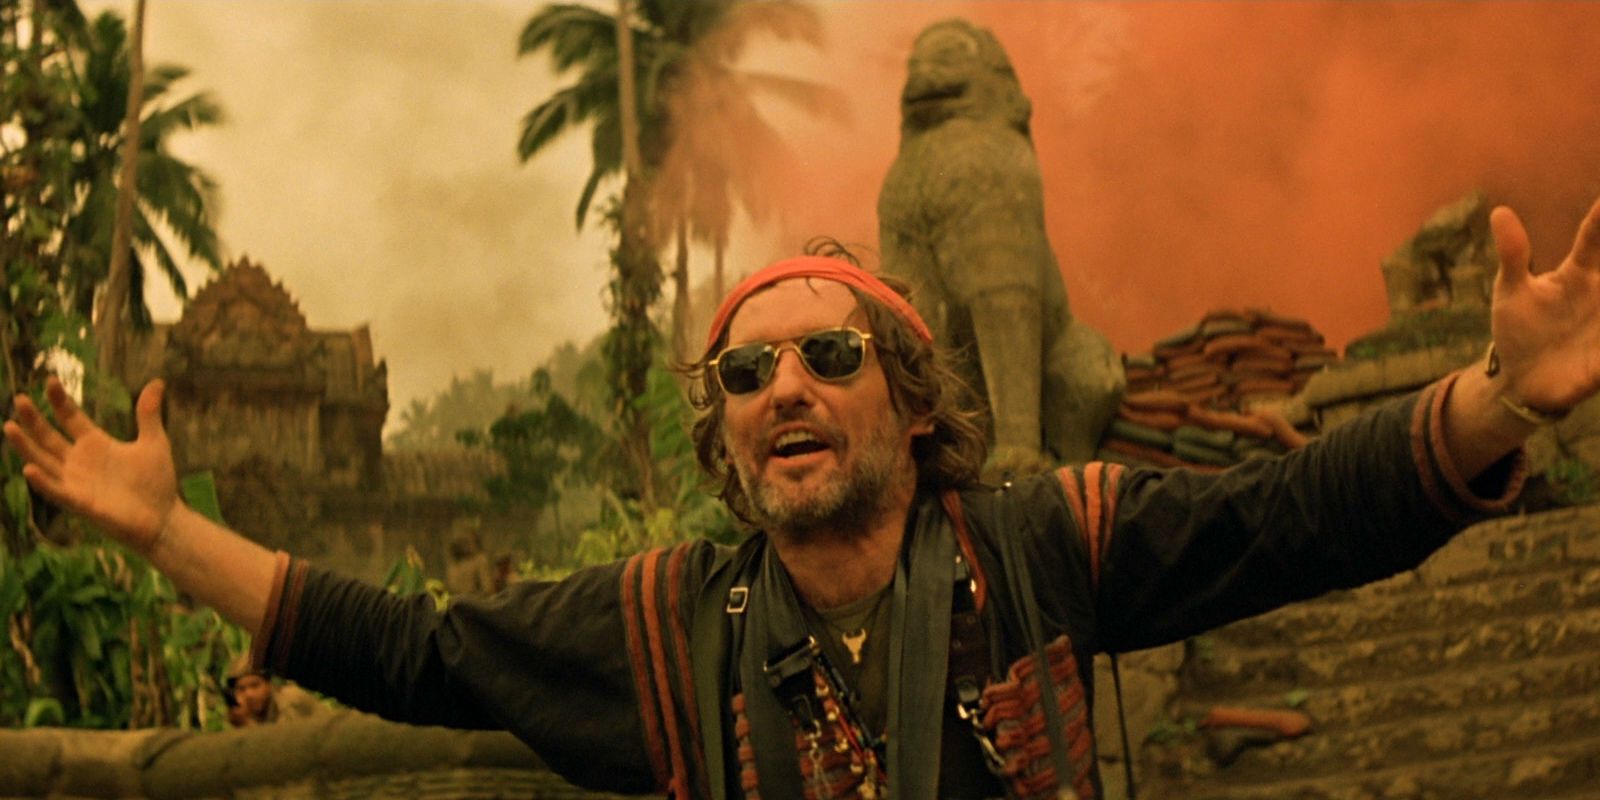 Dennis Hopper in front of a red plume of smoke in Apocalypse Now